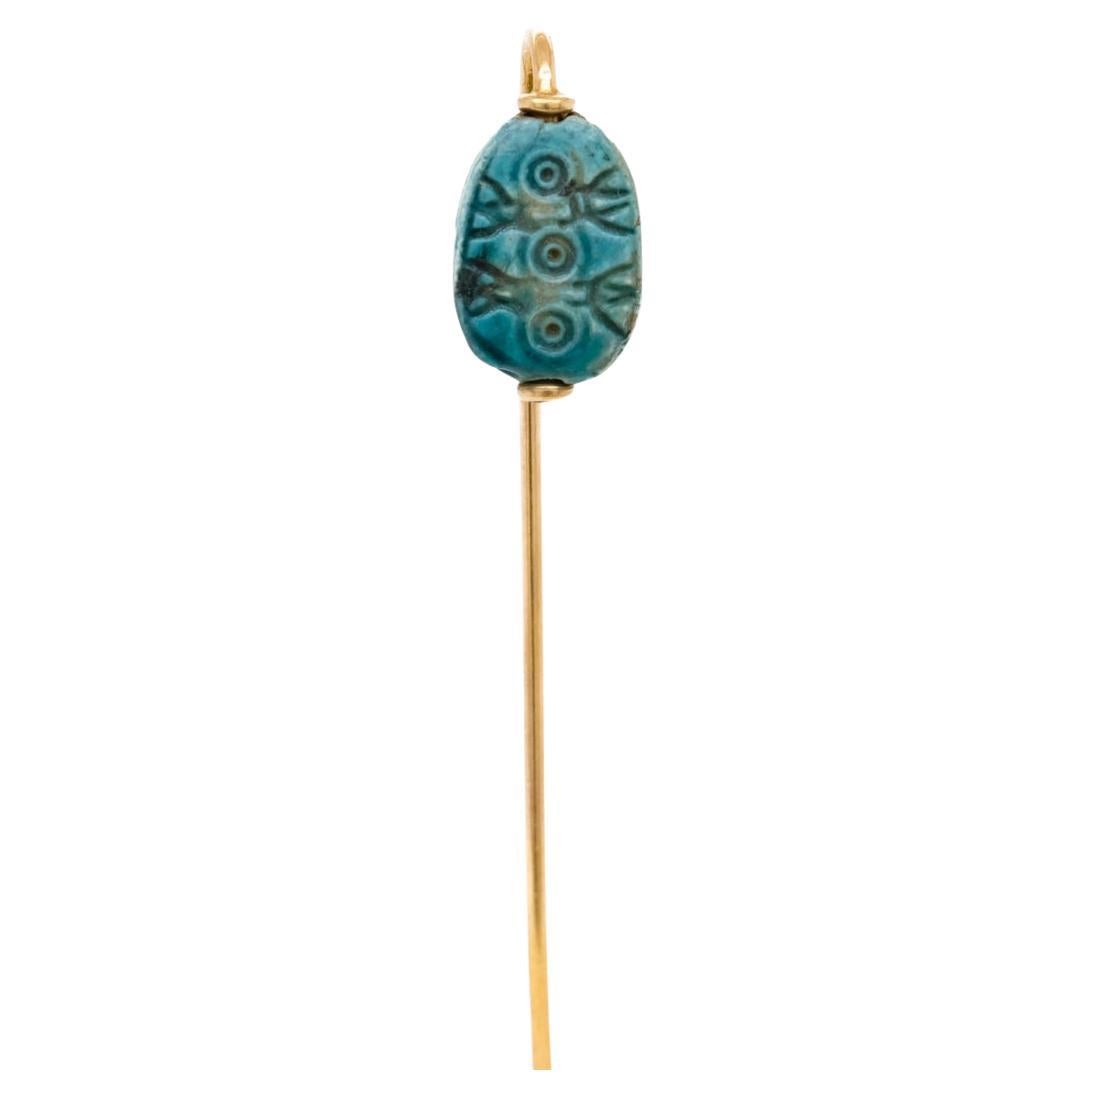 Antique Egyptian Revival Faience Scarab & 14K Gold Stick Pin